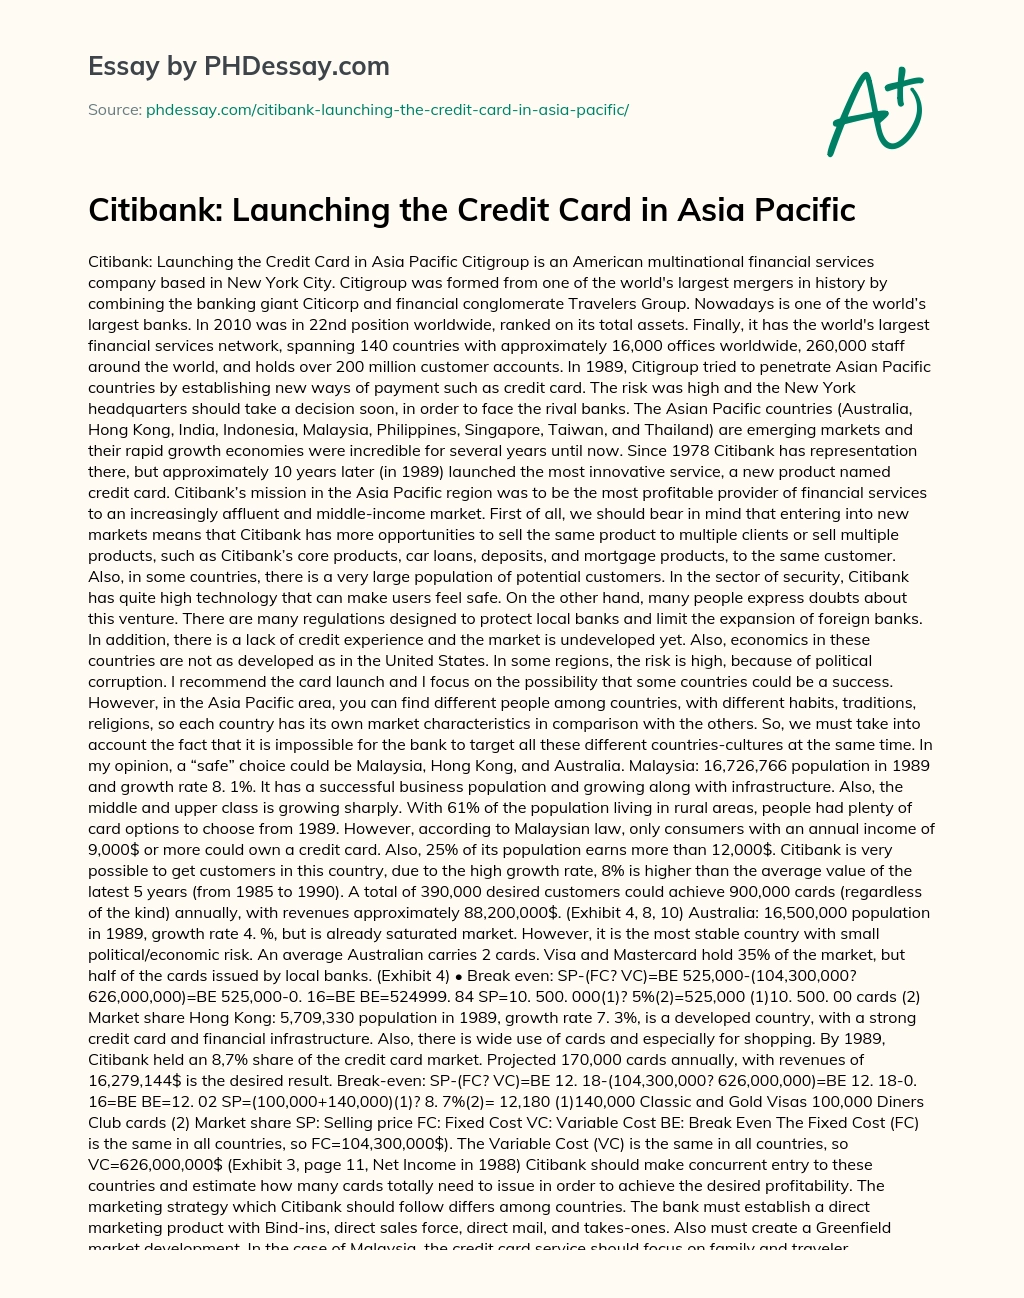 Citibank: Launching the Credit Card in Asia Pacific essay